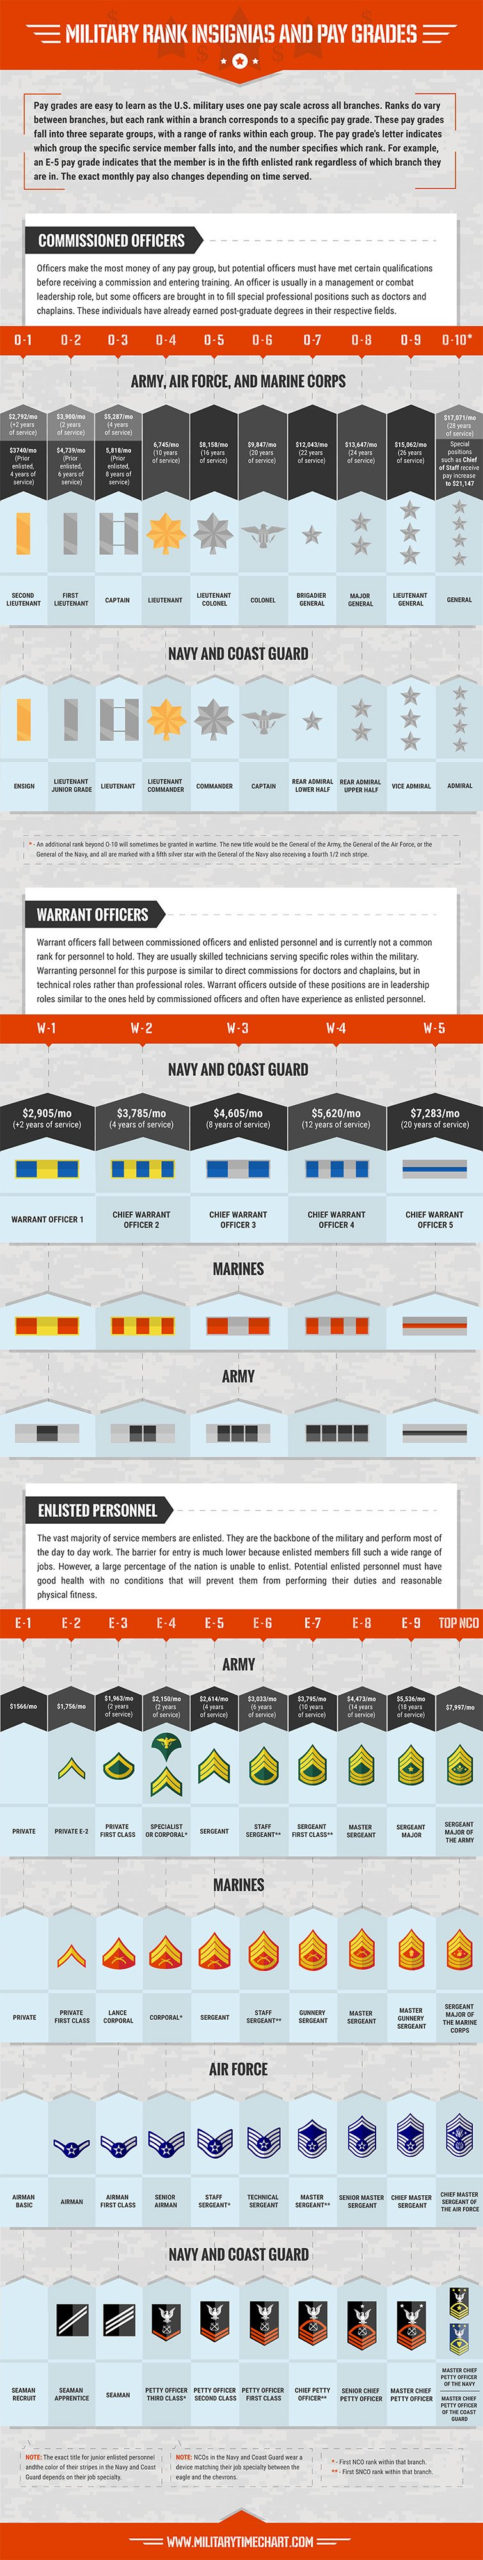 Military Pay Chart And Rank Insignia (Pay Scales) - Military